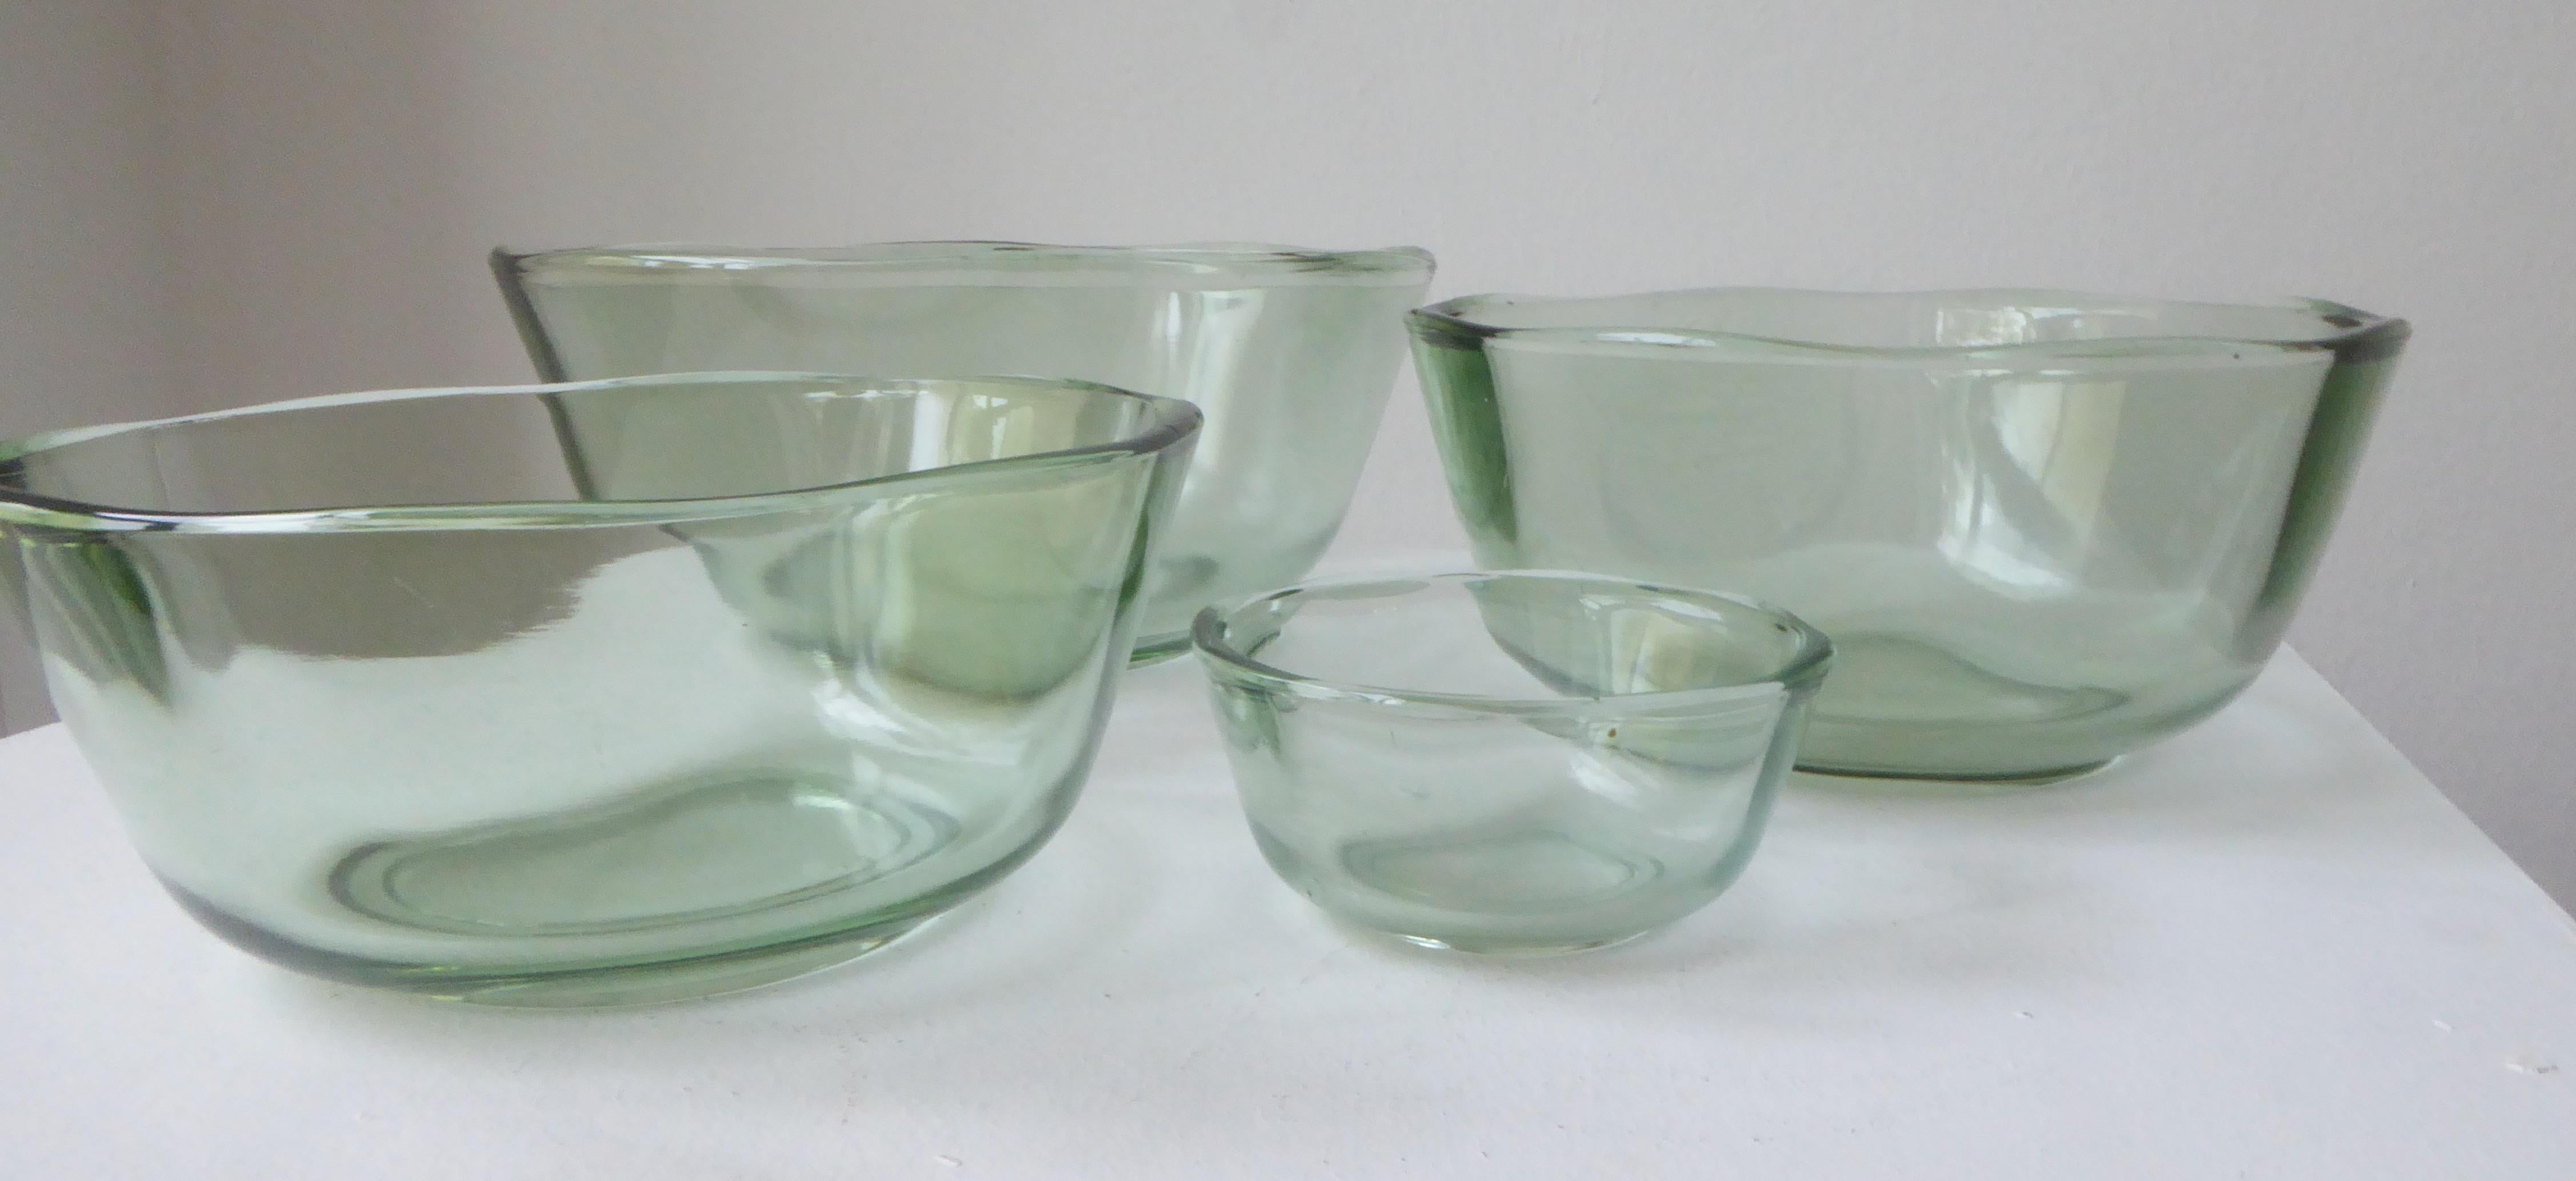 Set of 4 Bowls Model Erbach by Wilhelm Wagenfeld 1938, Early Production For Sale 1